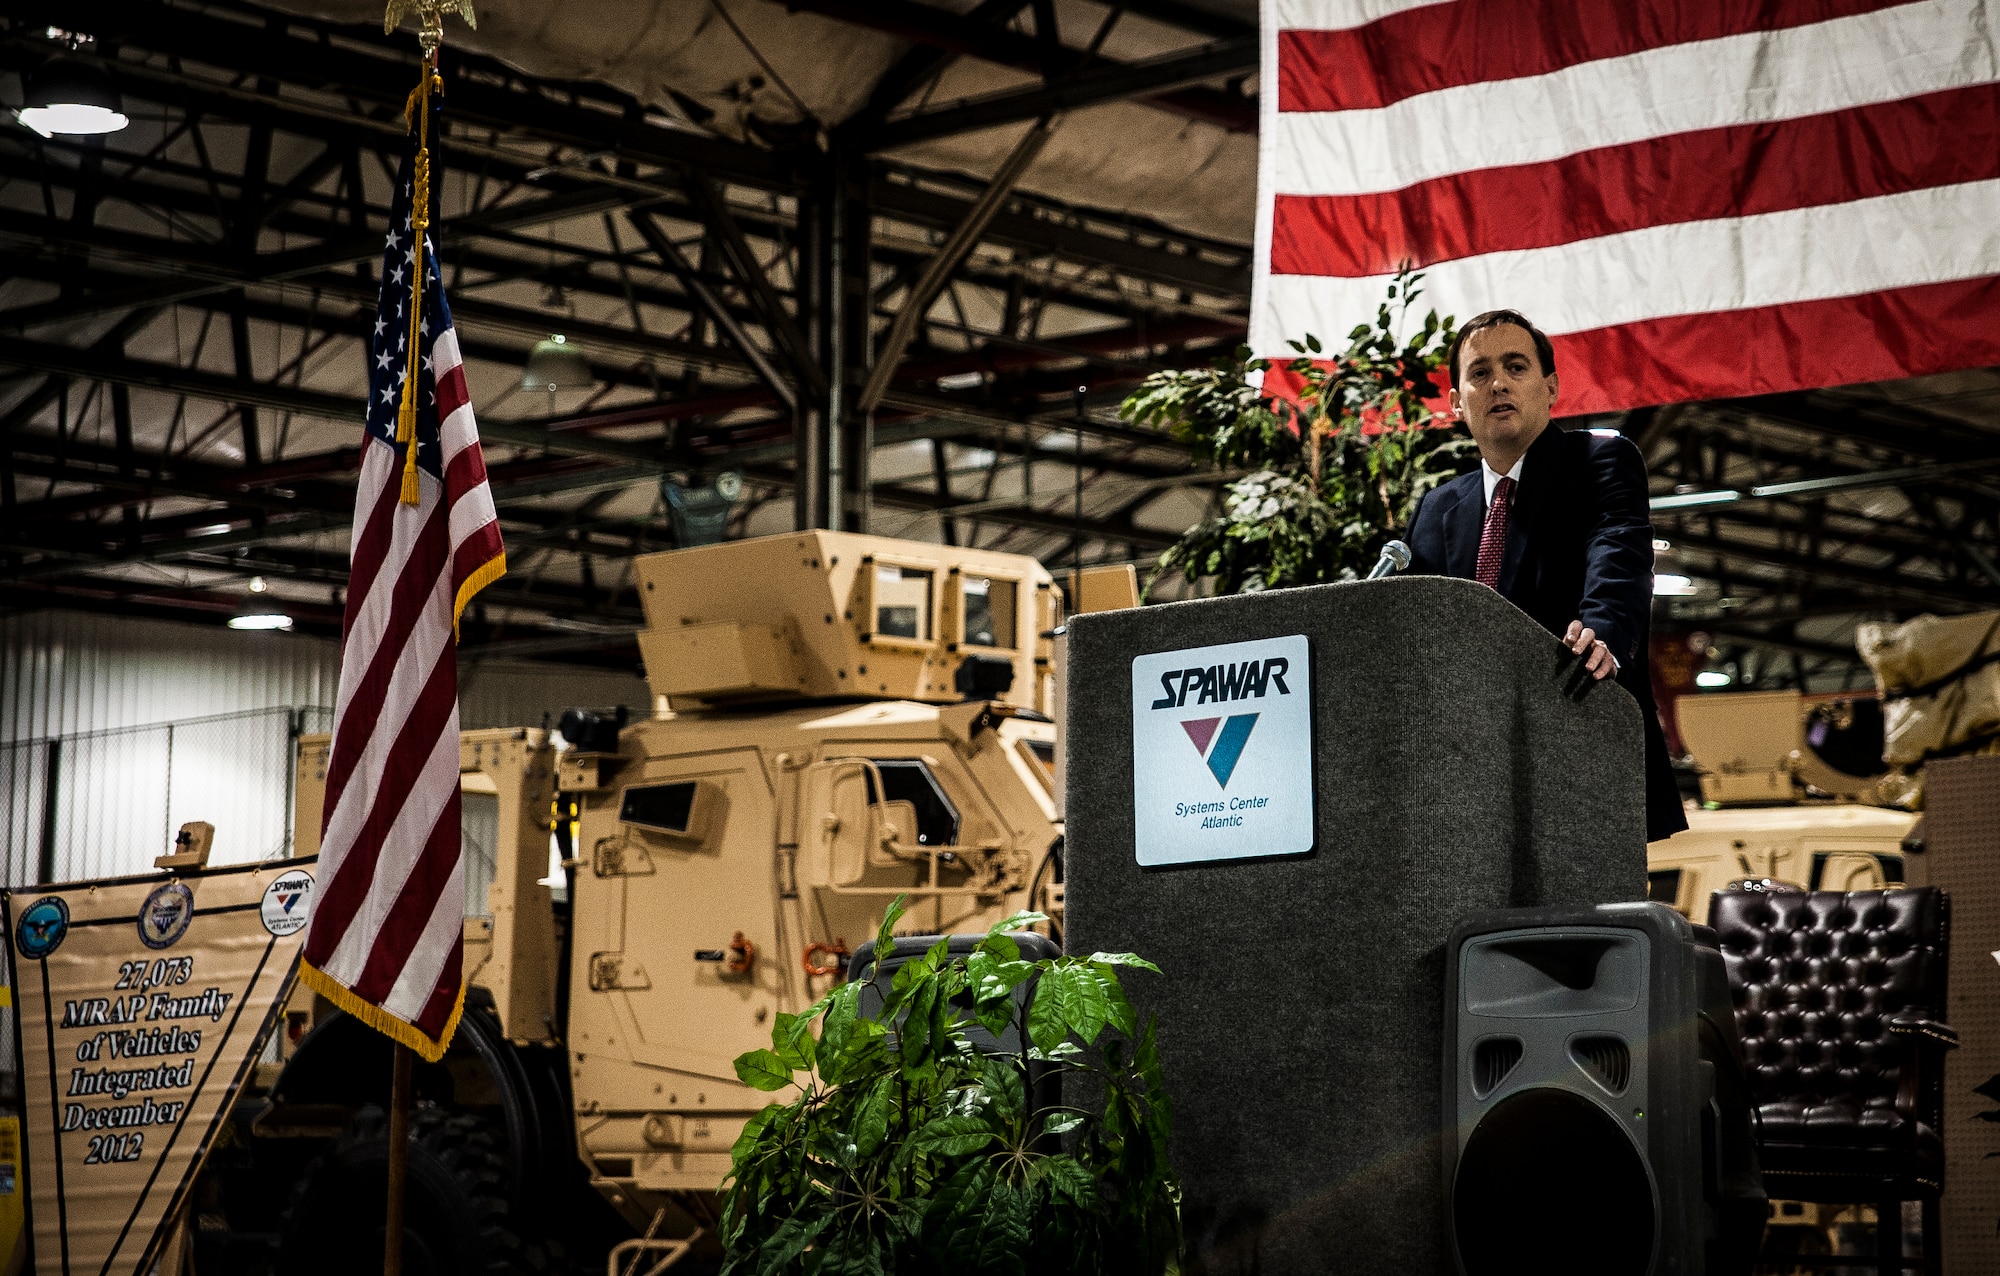 Christopher Miller, Space and Naval Warfare Systems Center Atlantic executive director, speaks to invited guests and workers who helped integrate the mine-resistant, ambush-protected vehicles at a ceremony held to commemorate the rapid acquisition, integration of electronics and delivery of more than 27,000 MRAP vehicles sent to Iraq and Afghanistan, Dec. 10, 2012, from the SPAWAR integration facility on Joint Base Charleston – Weapons Station, S.C. The team at SPAWAR initially integrated five vehicles a day, but when demand for the vehicles rose, the team stepped production up to integrating 50 vehicles a day. The team even reached the lofty goal of integrating 75 MRAPSs in one day. (U.S. Air Force photo/ Senior Airman Dennis Sloan)